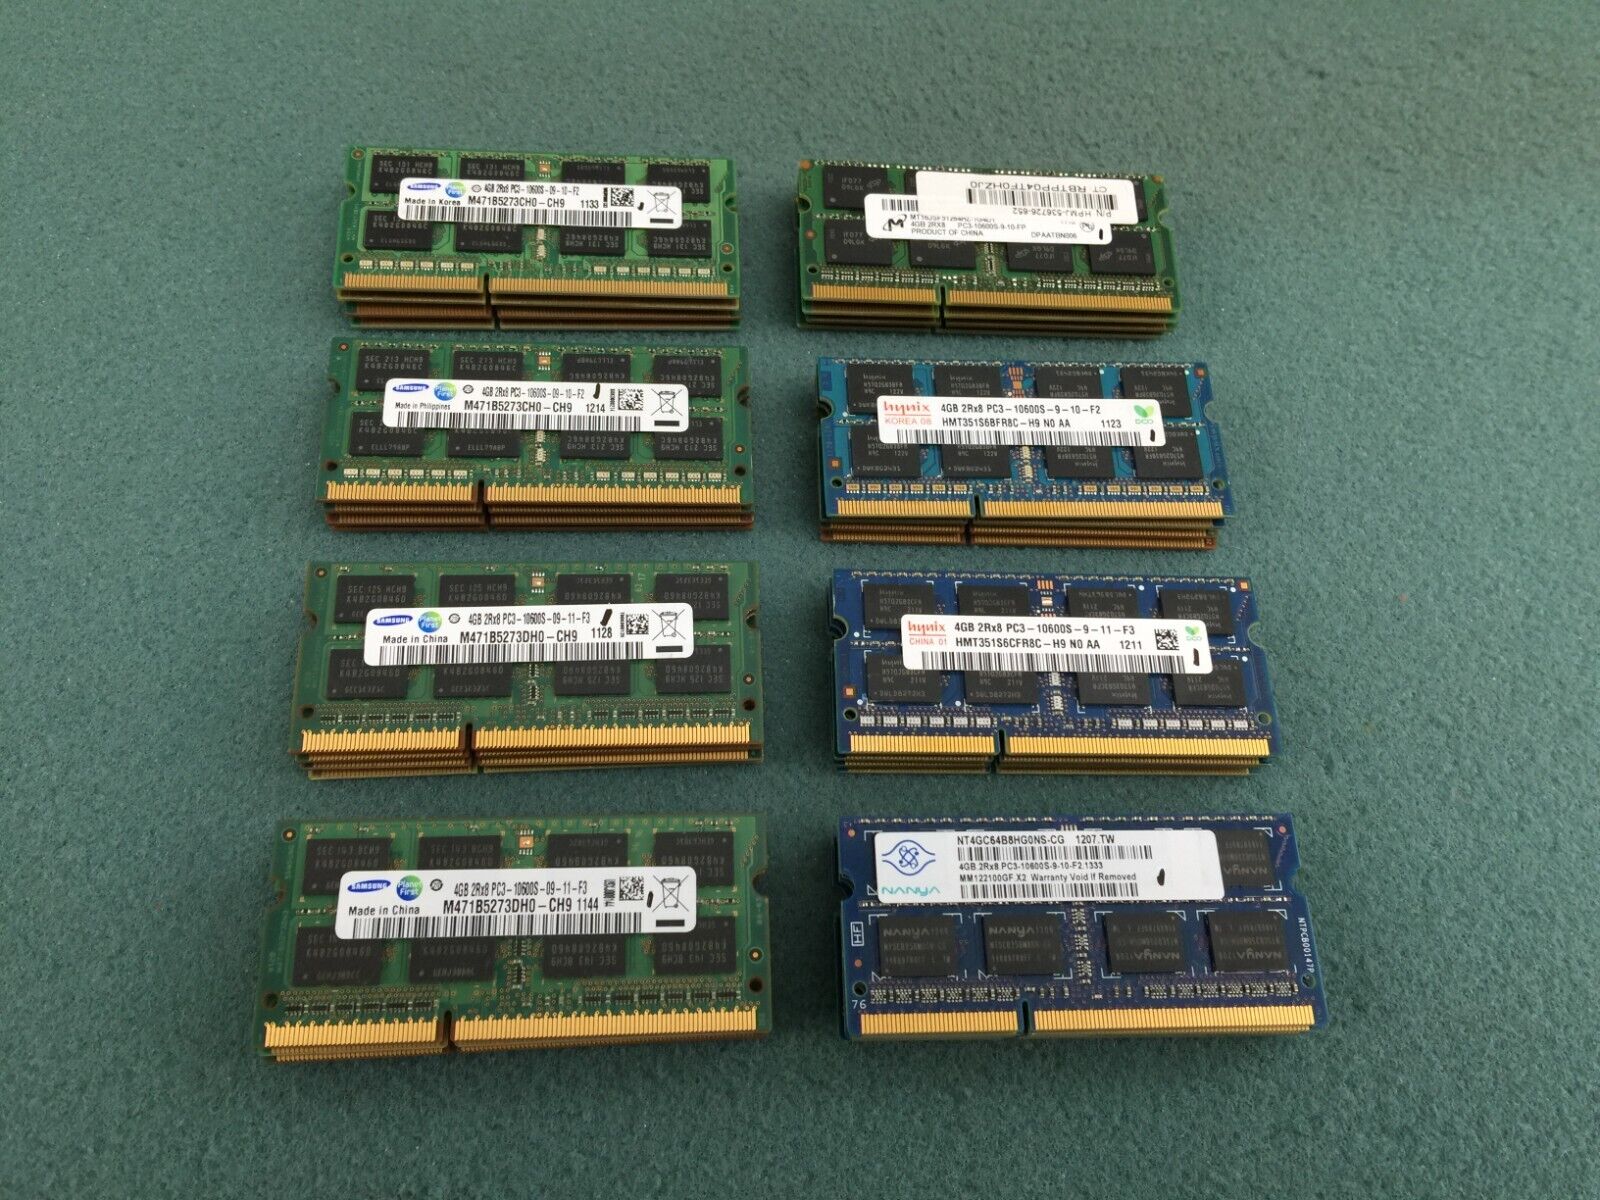 (Lot of 32) Mixed 4GB PC3-10600S 1333MHz DDR3 SODIMM Laptop Memory RAM - R473